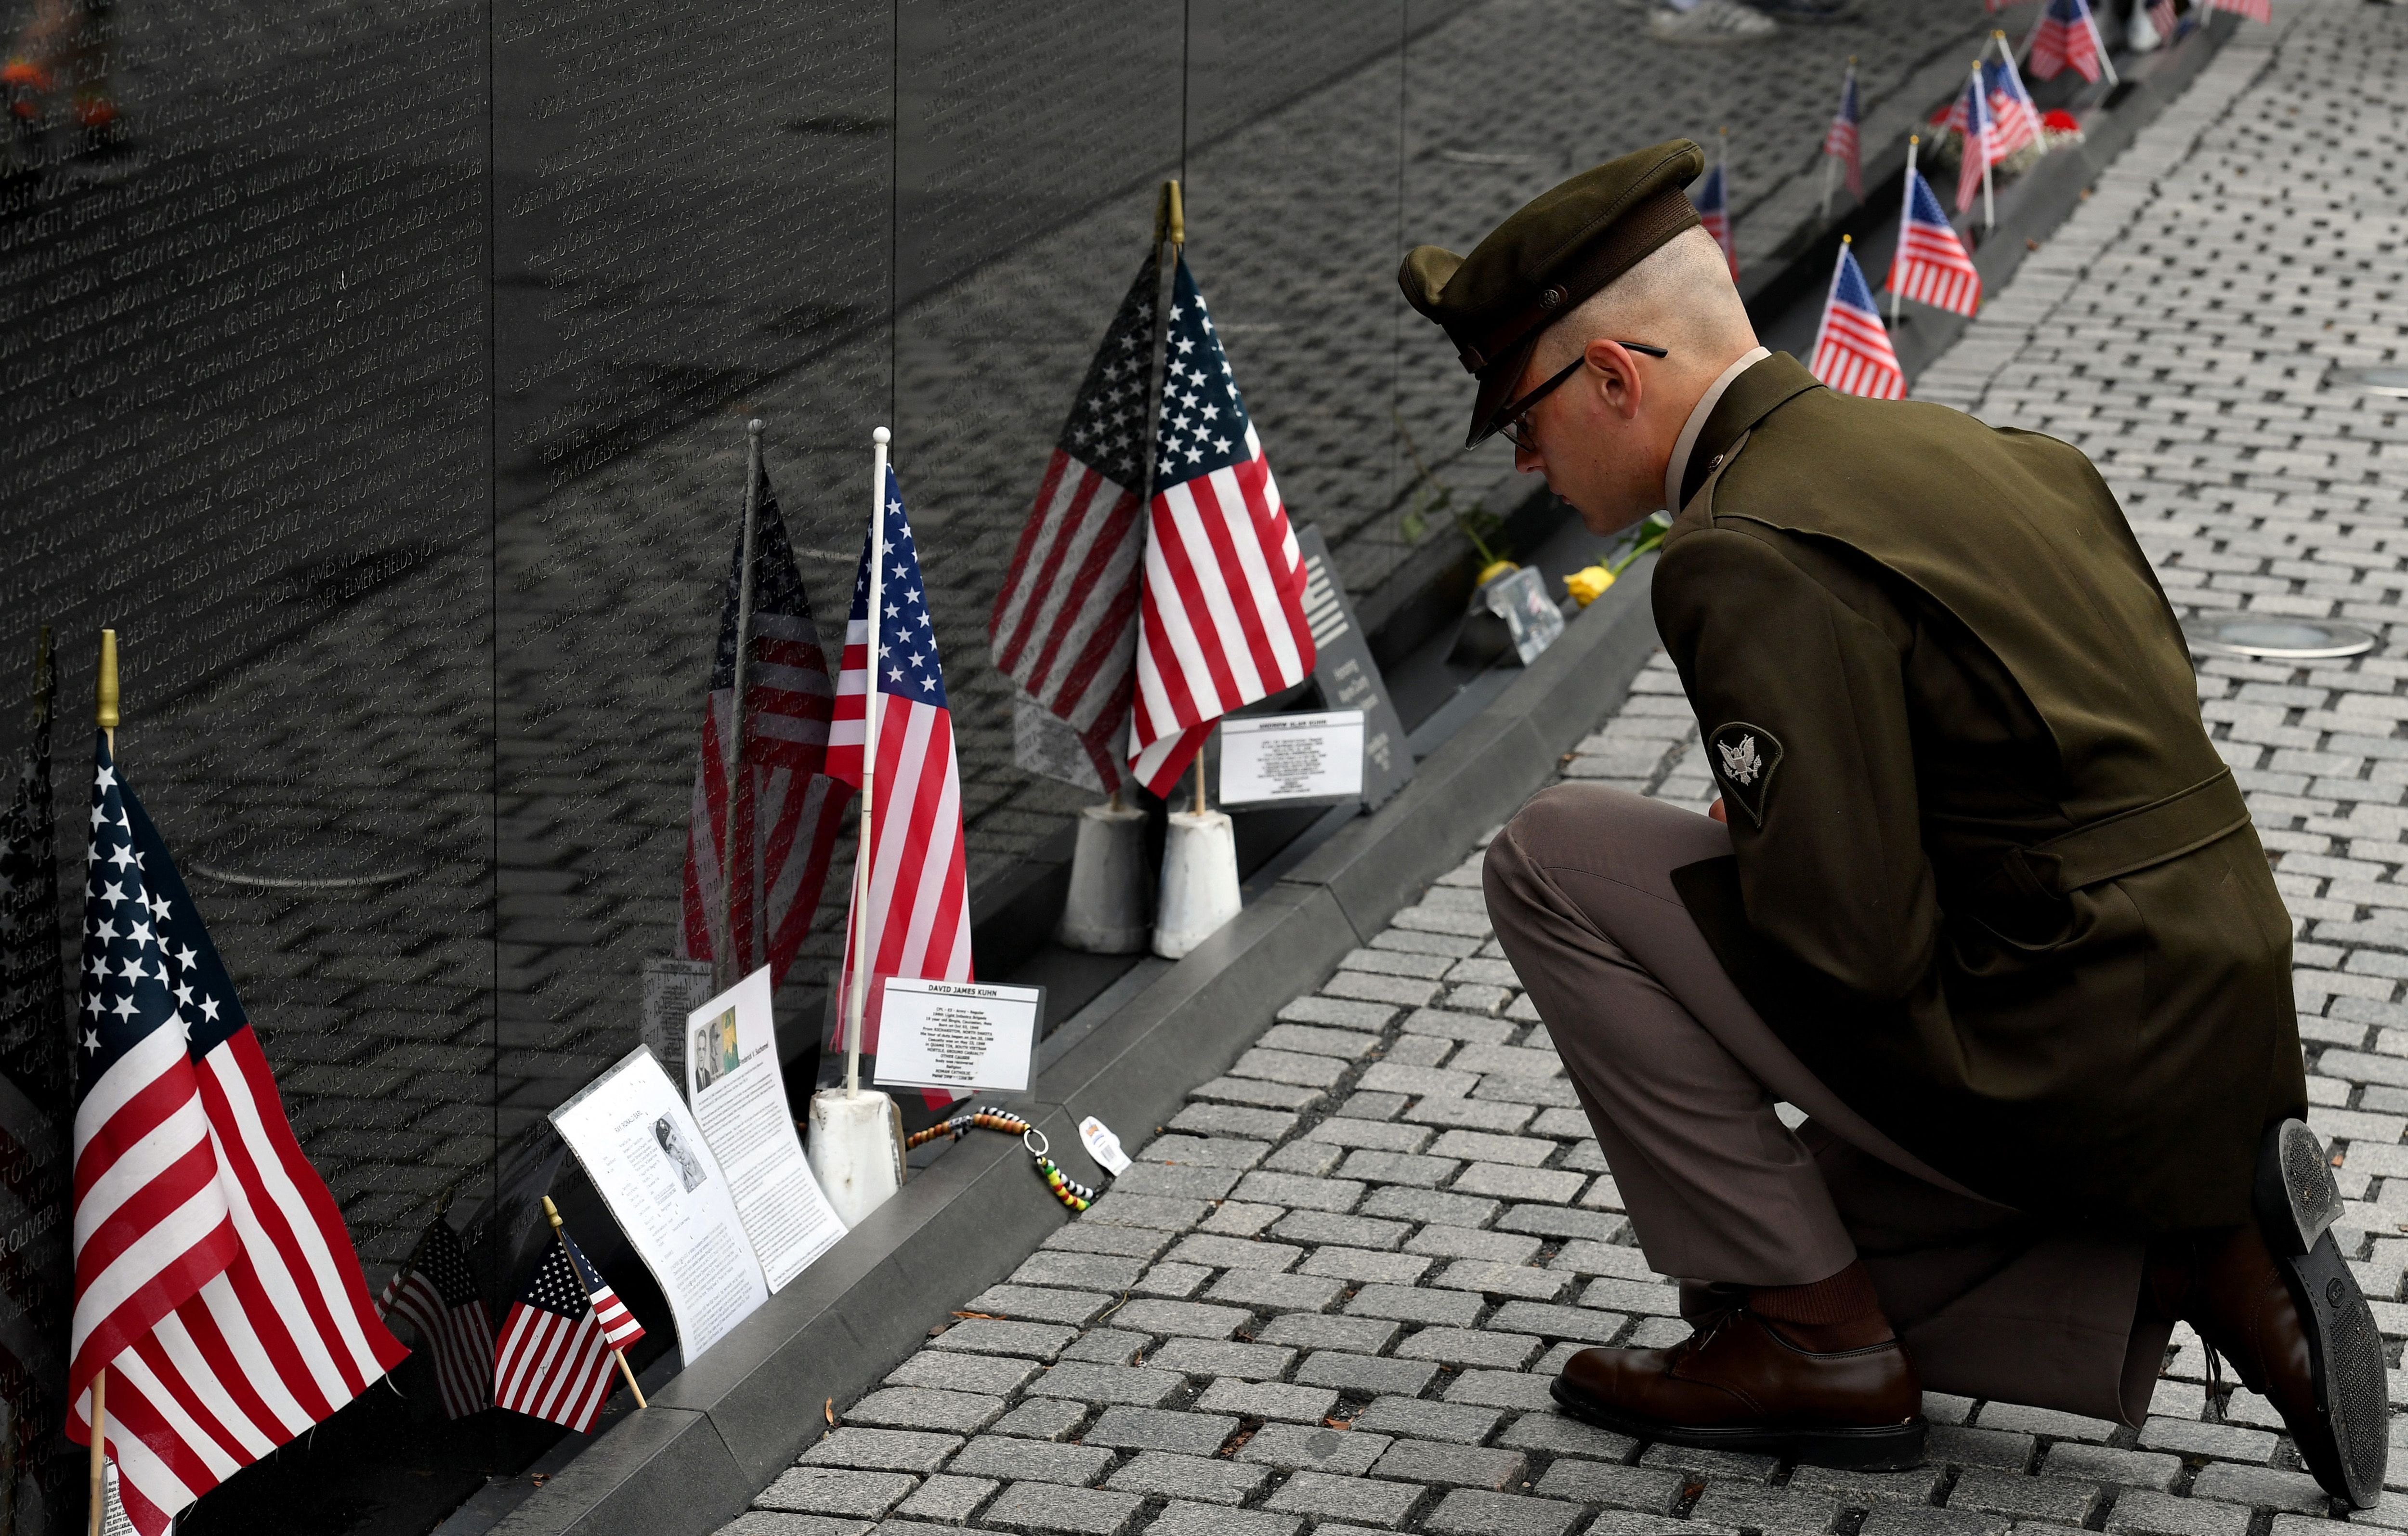 A man in uniform leans down to read names on a plaque surrounded by small American flags